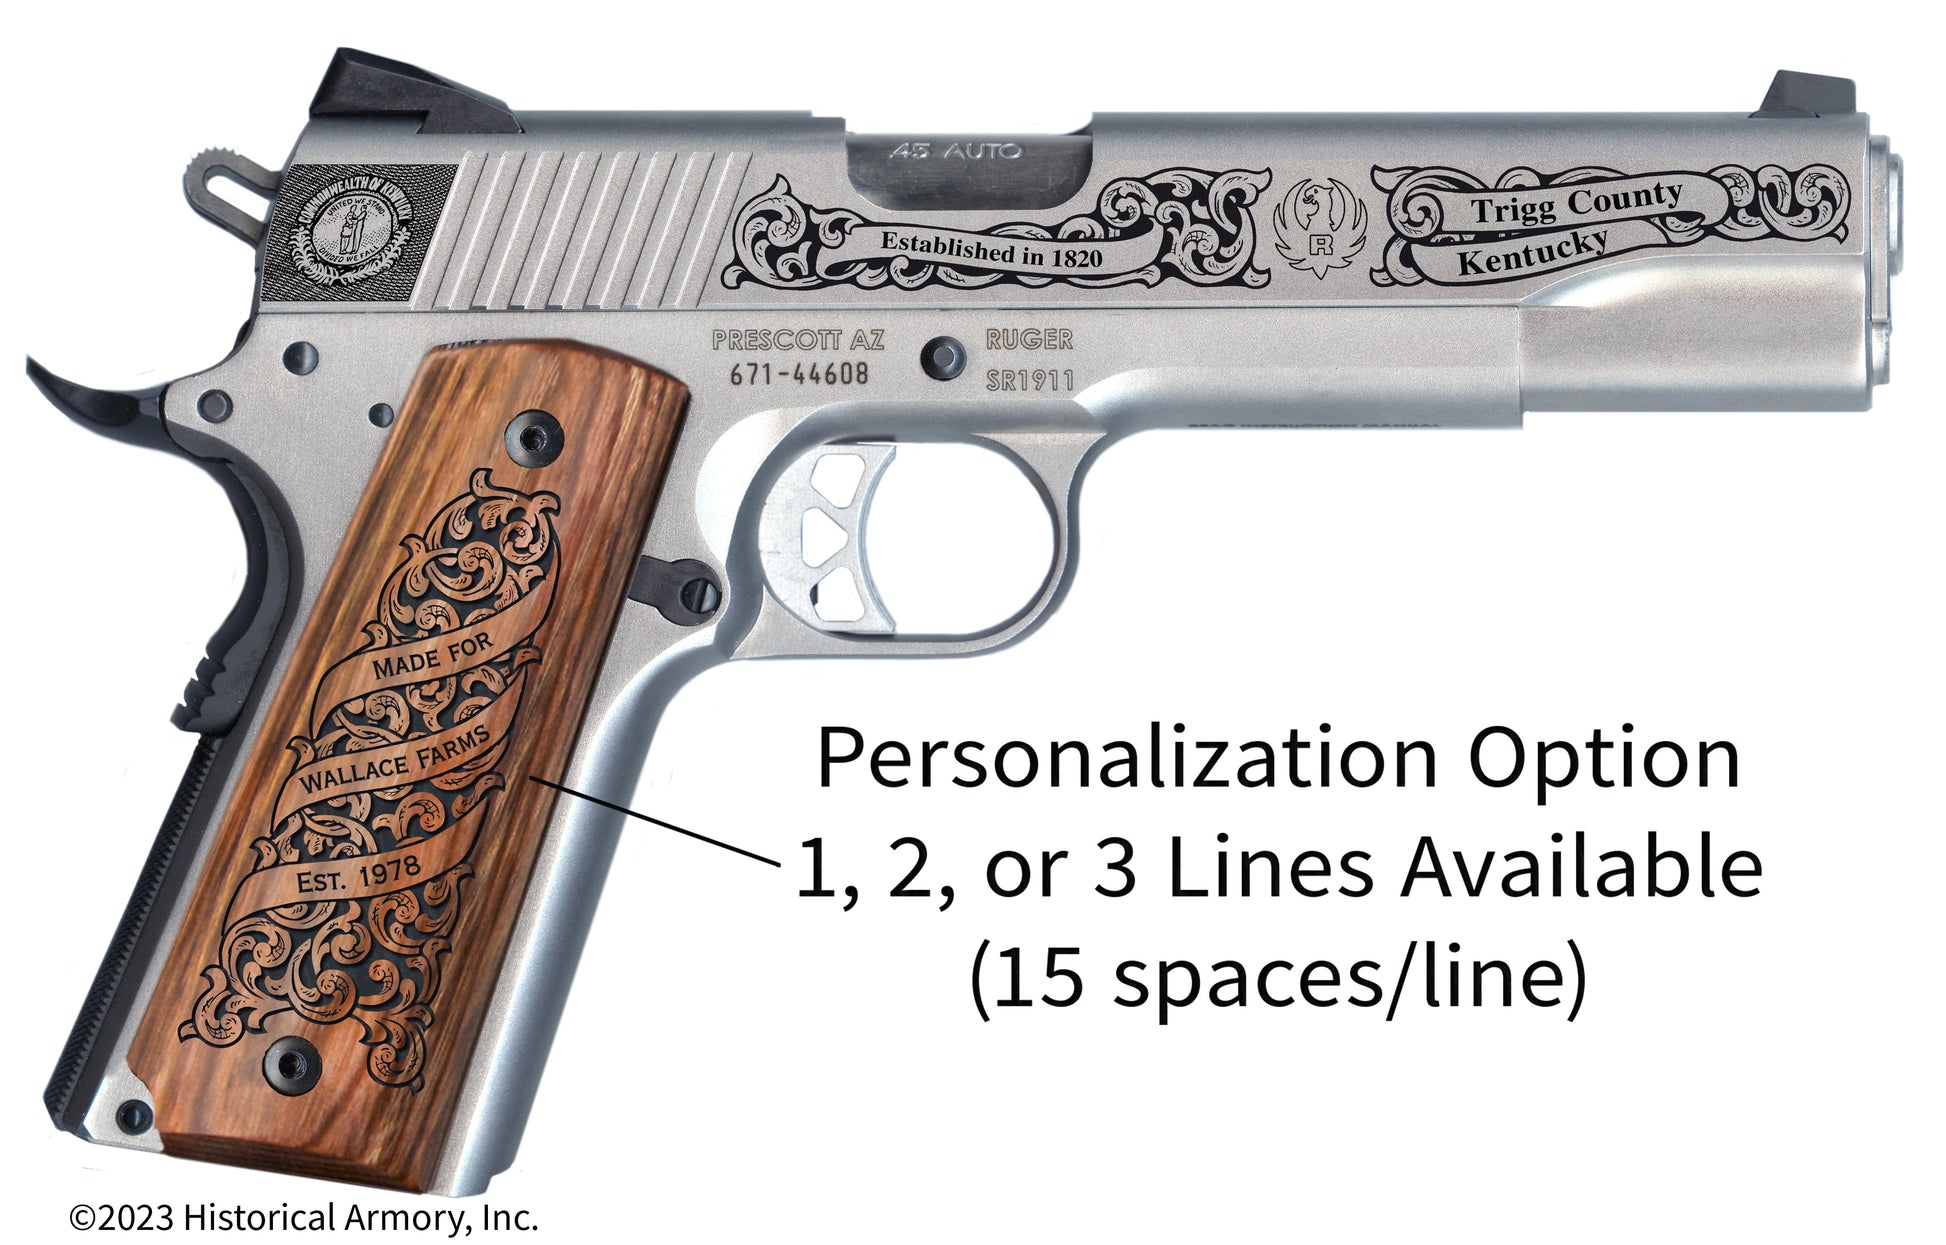 Trigg County Kentucky Personalized Engraved .45 Auto Ruger 1911